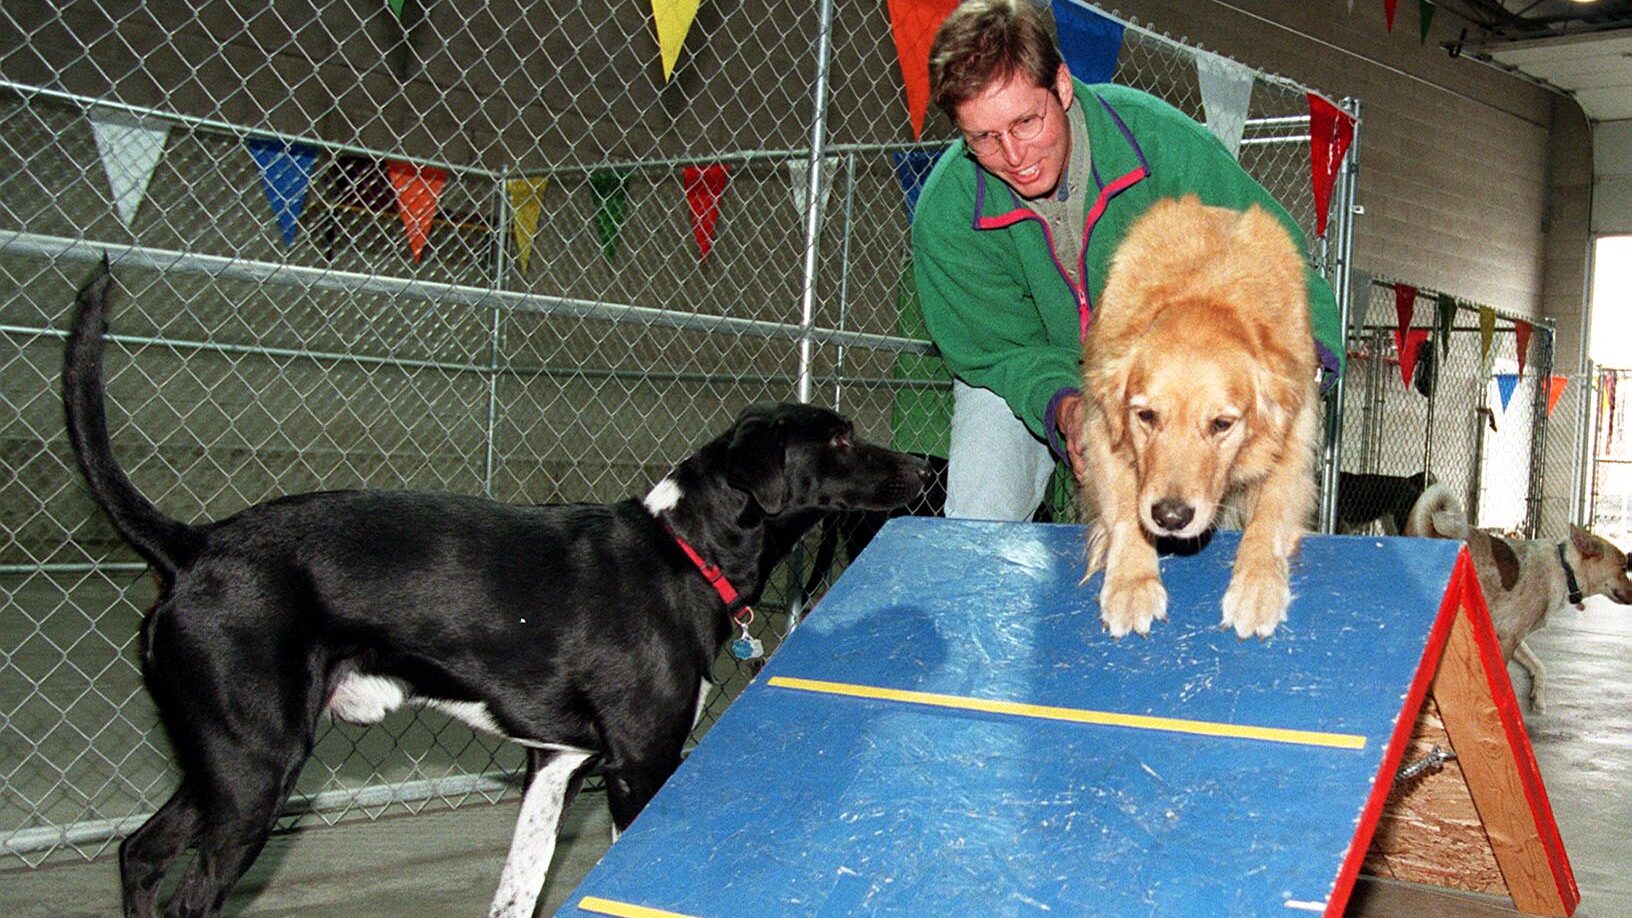 Brent Warner works on training and obedience as he helps Rudy over the ramp. Smokey waits his turn....